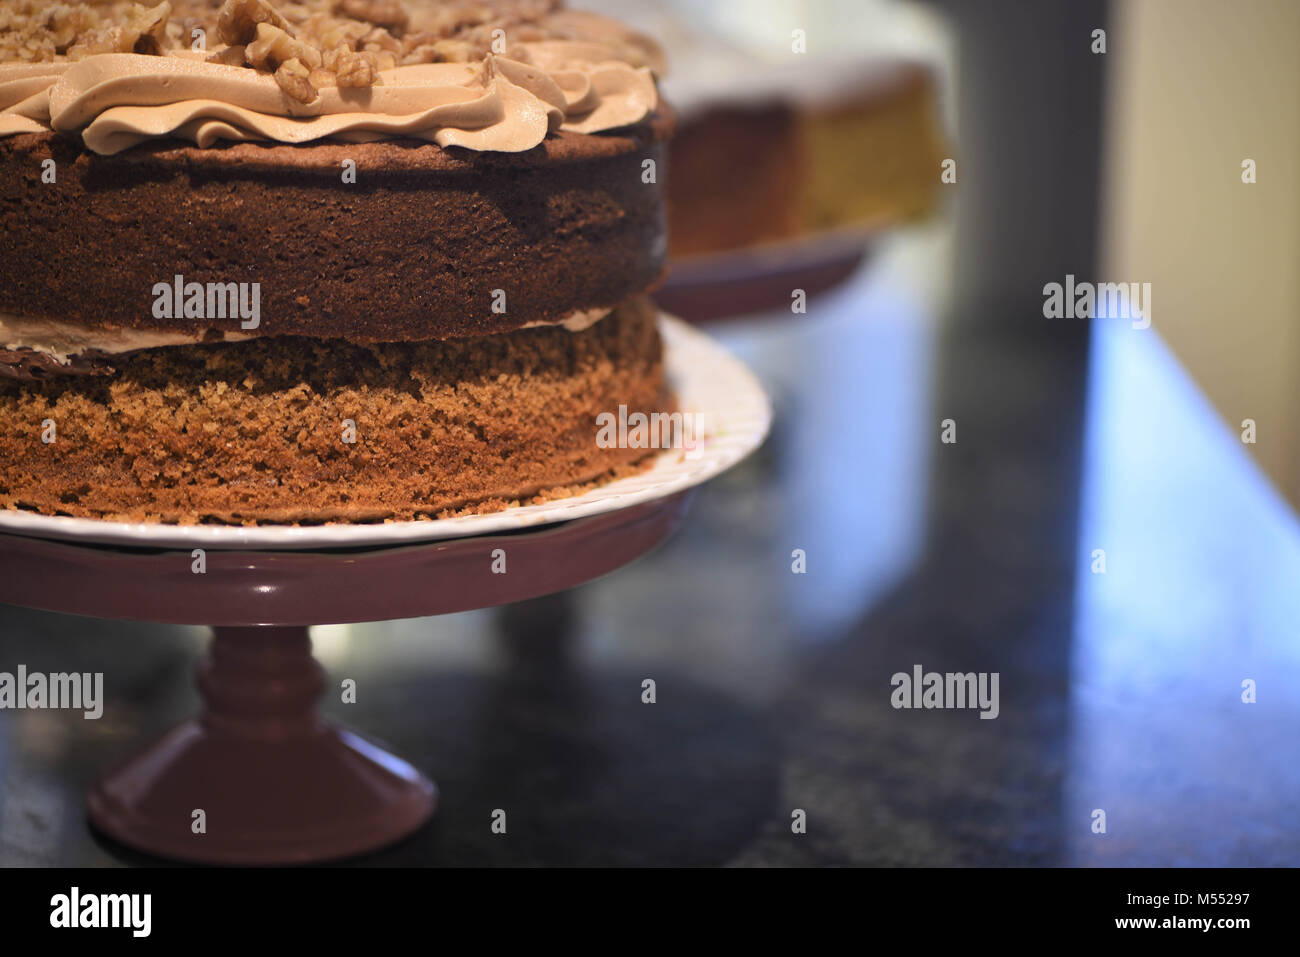 food close up of a baked coffee and pecan cake Stock Photo